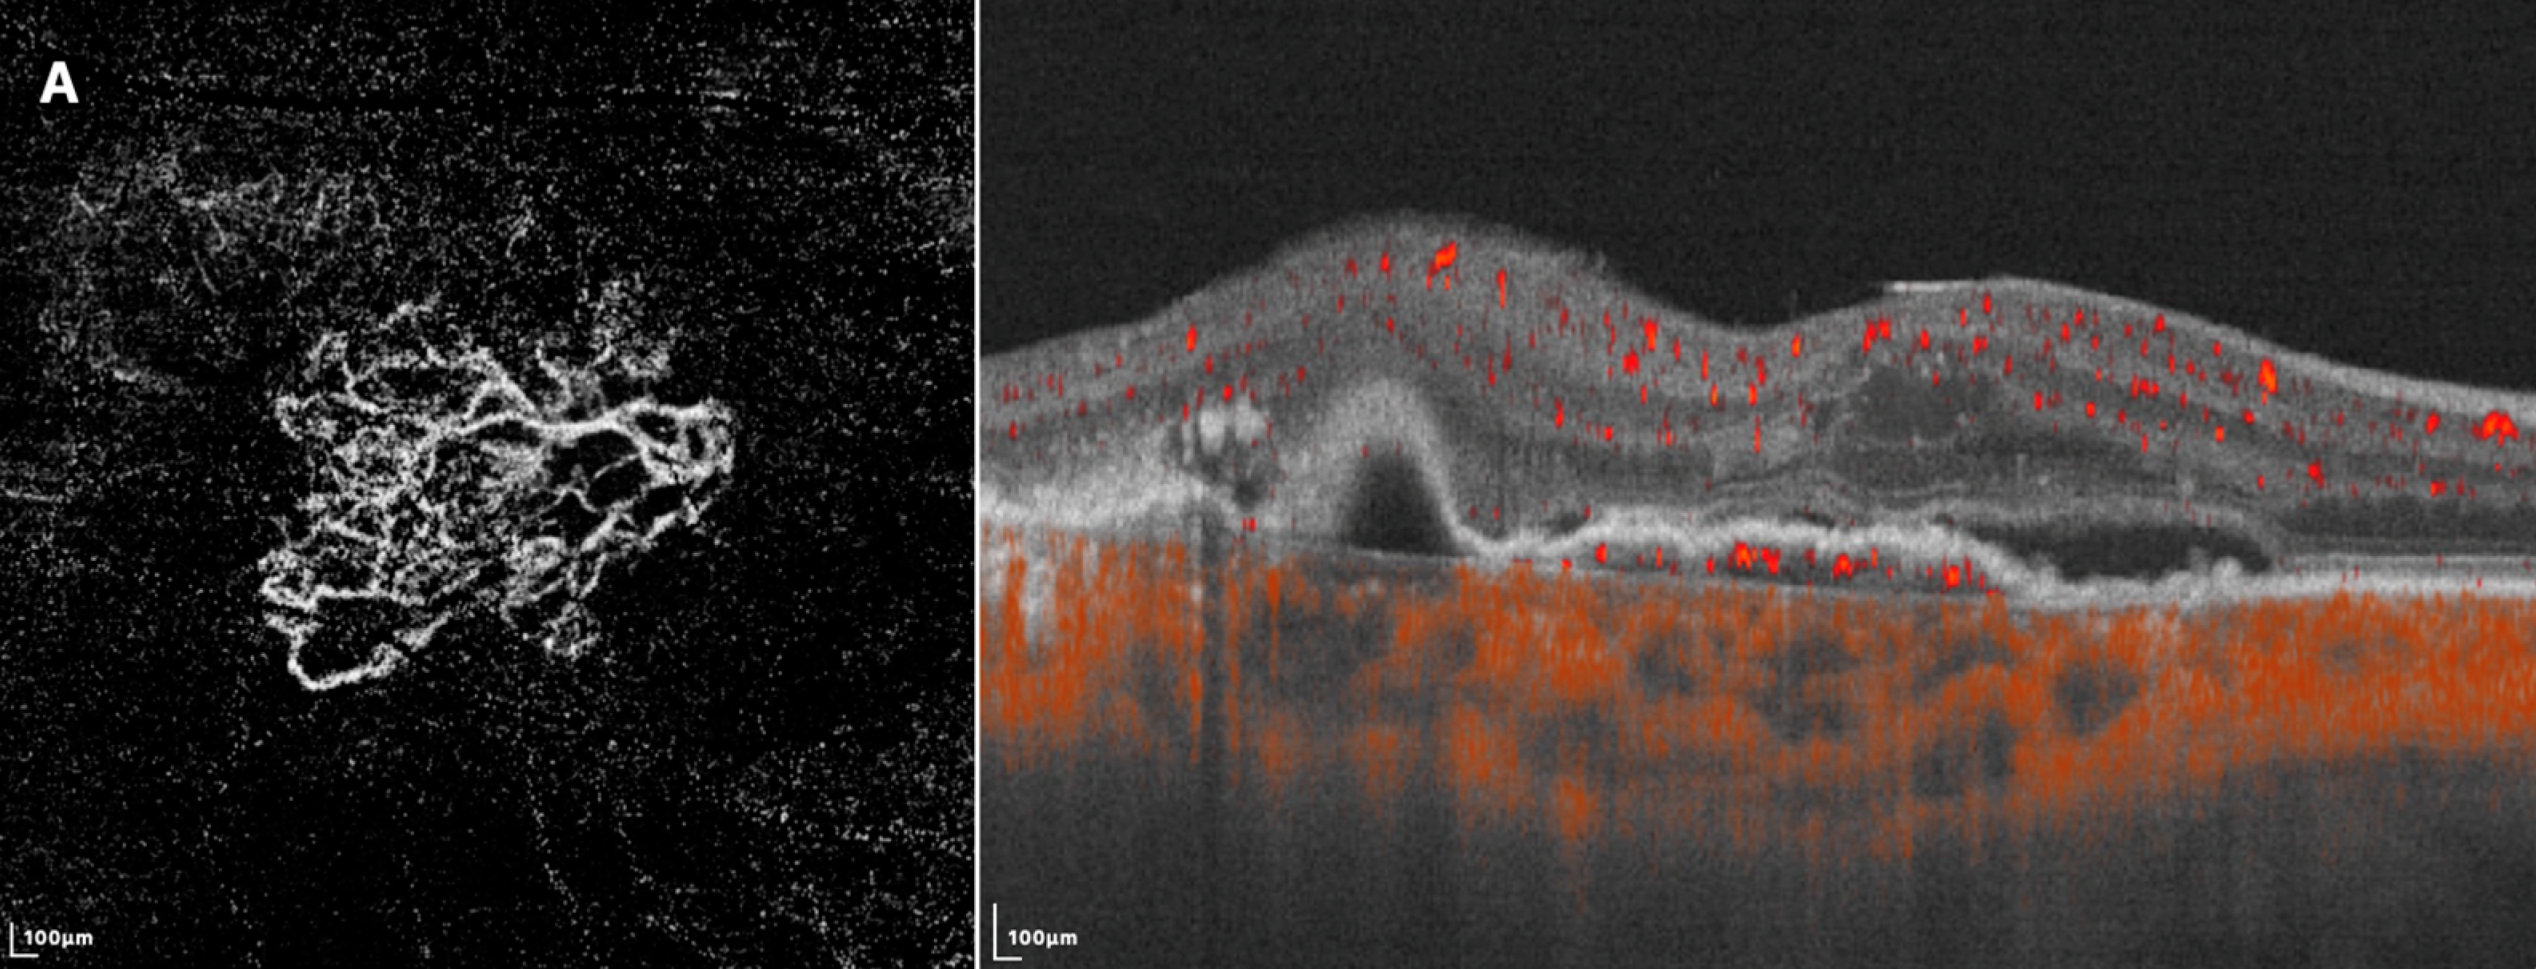 En face swept-source OCT- A (left) shows a loose pattern with characteristics such as anastomosis and loops. The corresponding B-scan SS-OCTA (right) shows subretinal fluid and rich flow signals under RPE. (From Gu X, et al. Diagnostics 2023, 13(14), 2458.